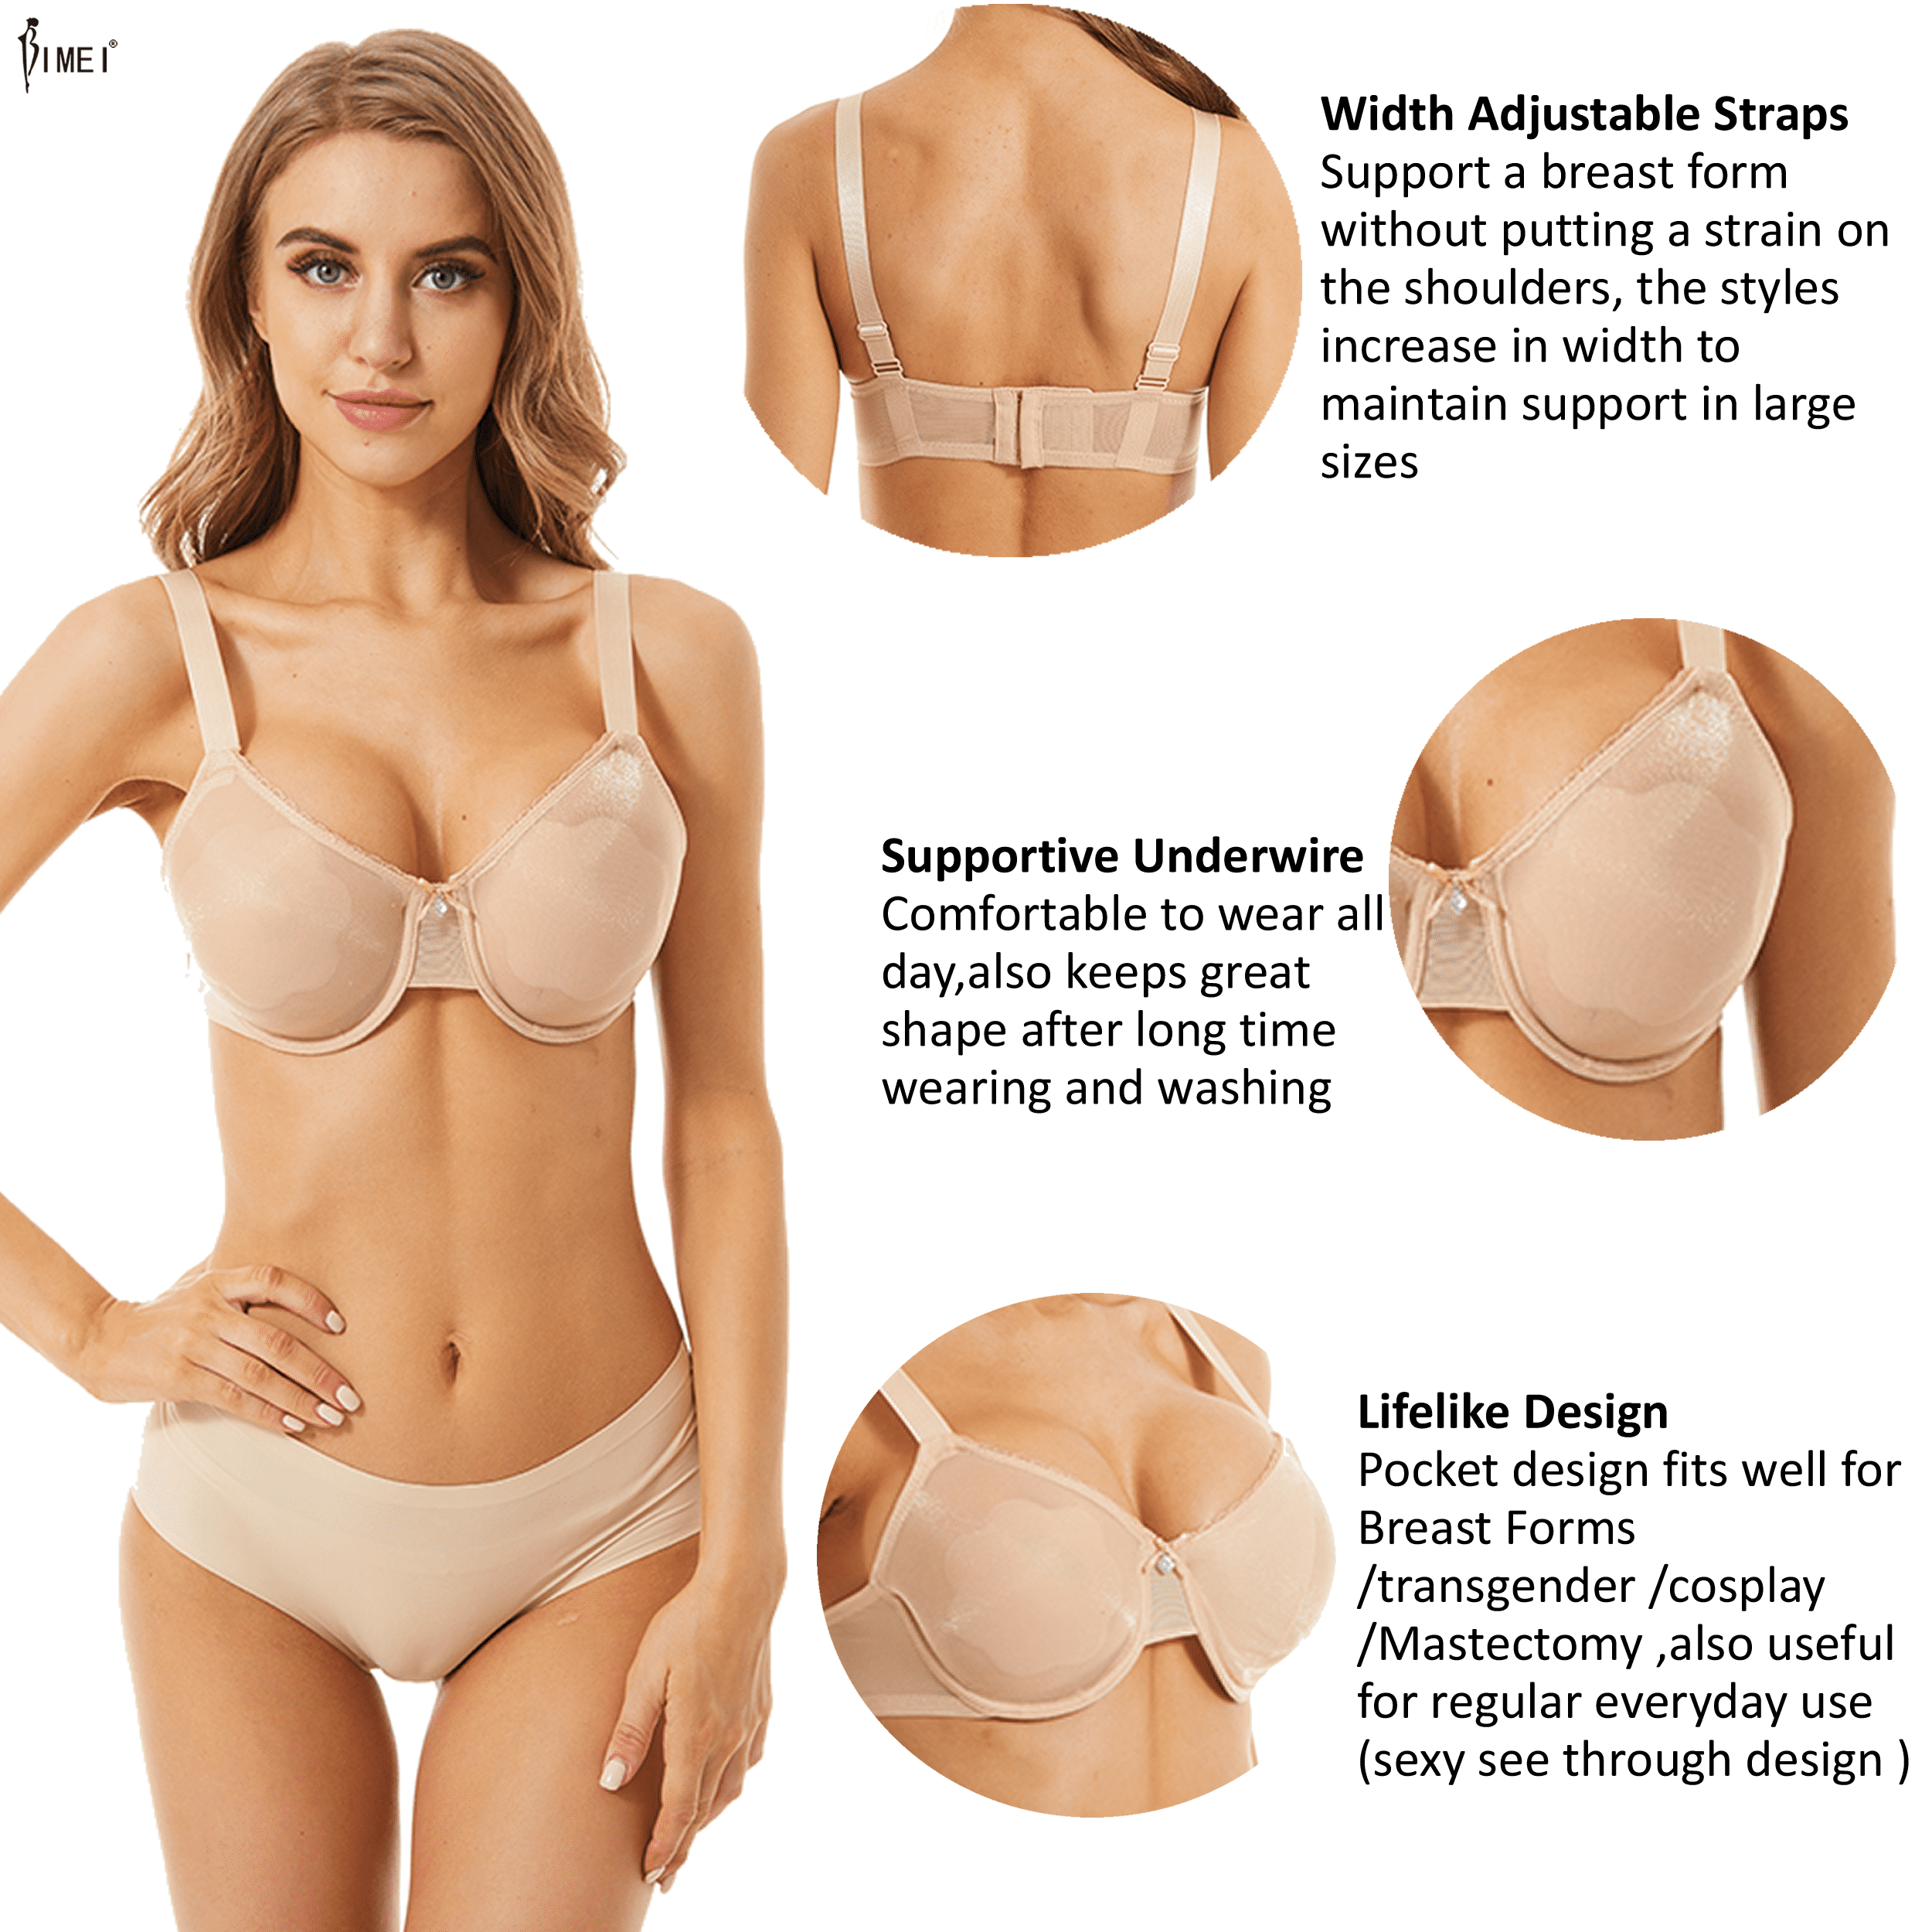 BIMEI See Through Bra CD Mastectomy Lingerie Bra Silicone Breast Forms  Prosthesis Pocket Bra with Steel Ring 9008,Beige,40B 